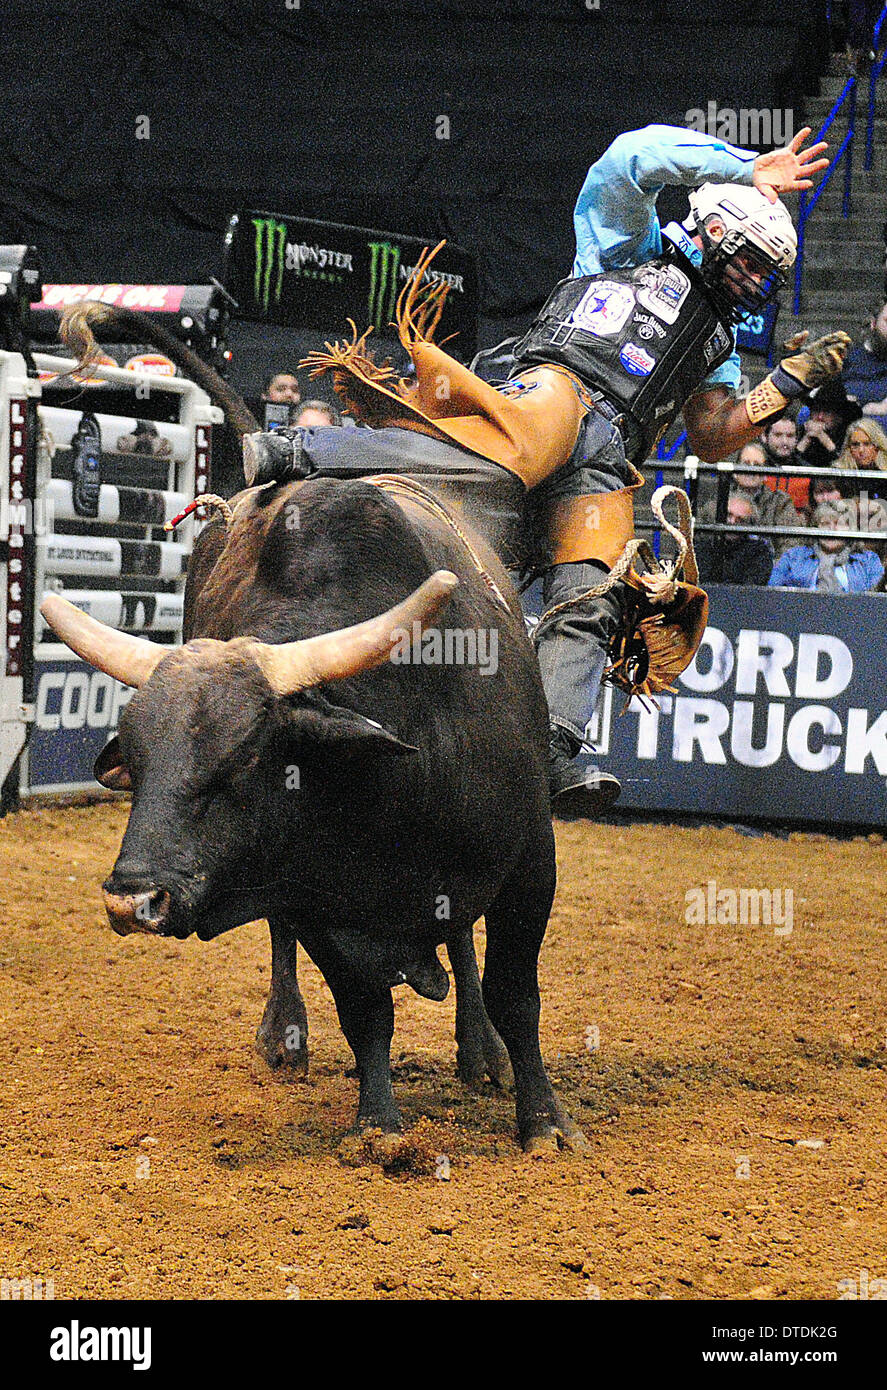 St. Louis, Missouri, USA. 15th Feb, 2014. February 14, 2014: Rider Billy Robinson on bull Dirty Martini during the Professional Bullriders Built Ford Tough Series St. Louis Invitational at Scott Trade Center in St. Louis. Credit:  csm/Alamy Live News Stock Photo